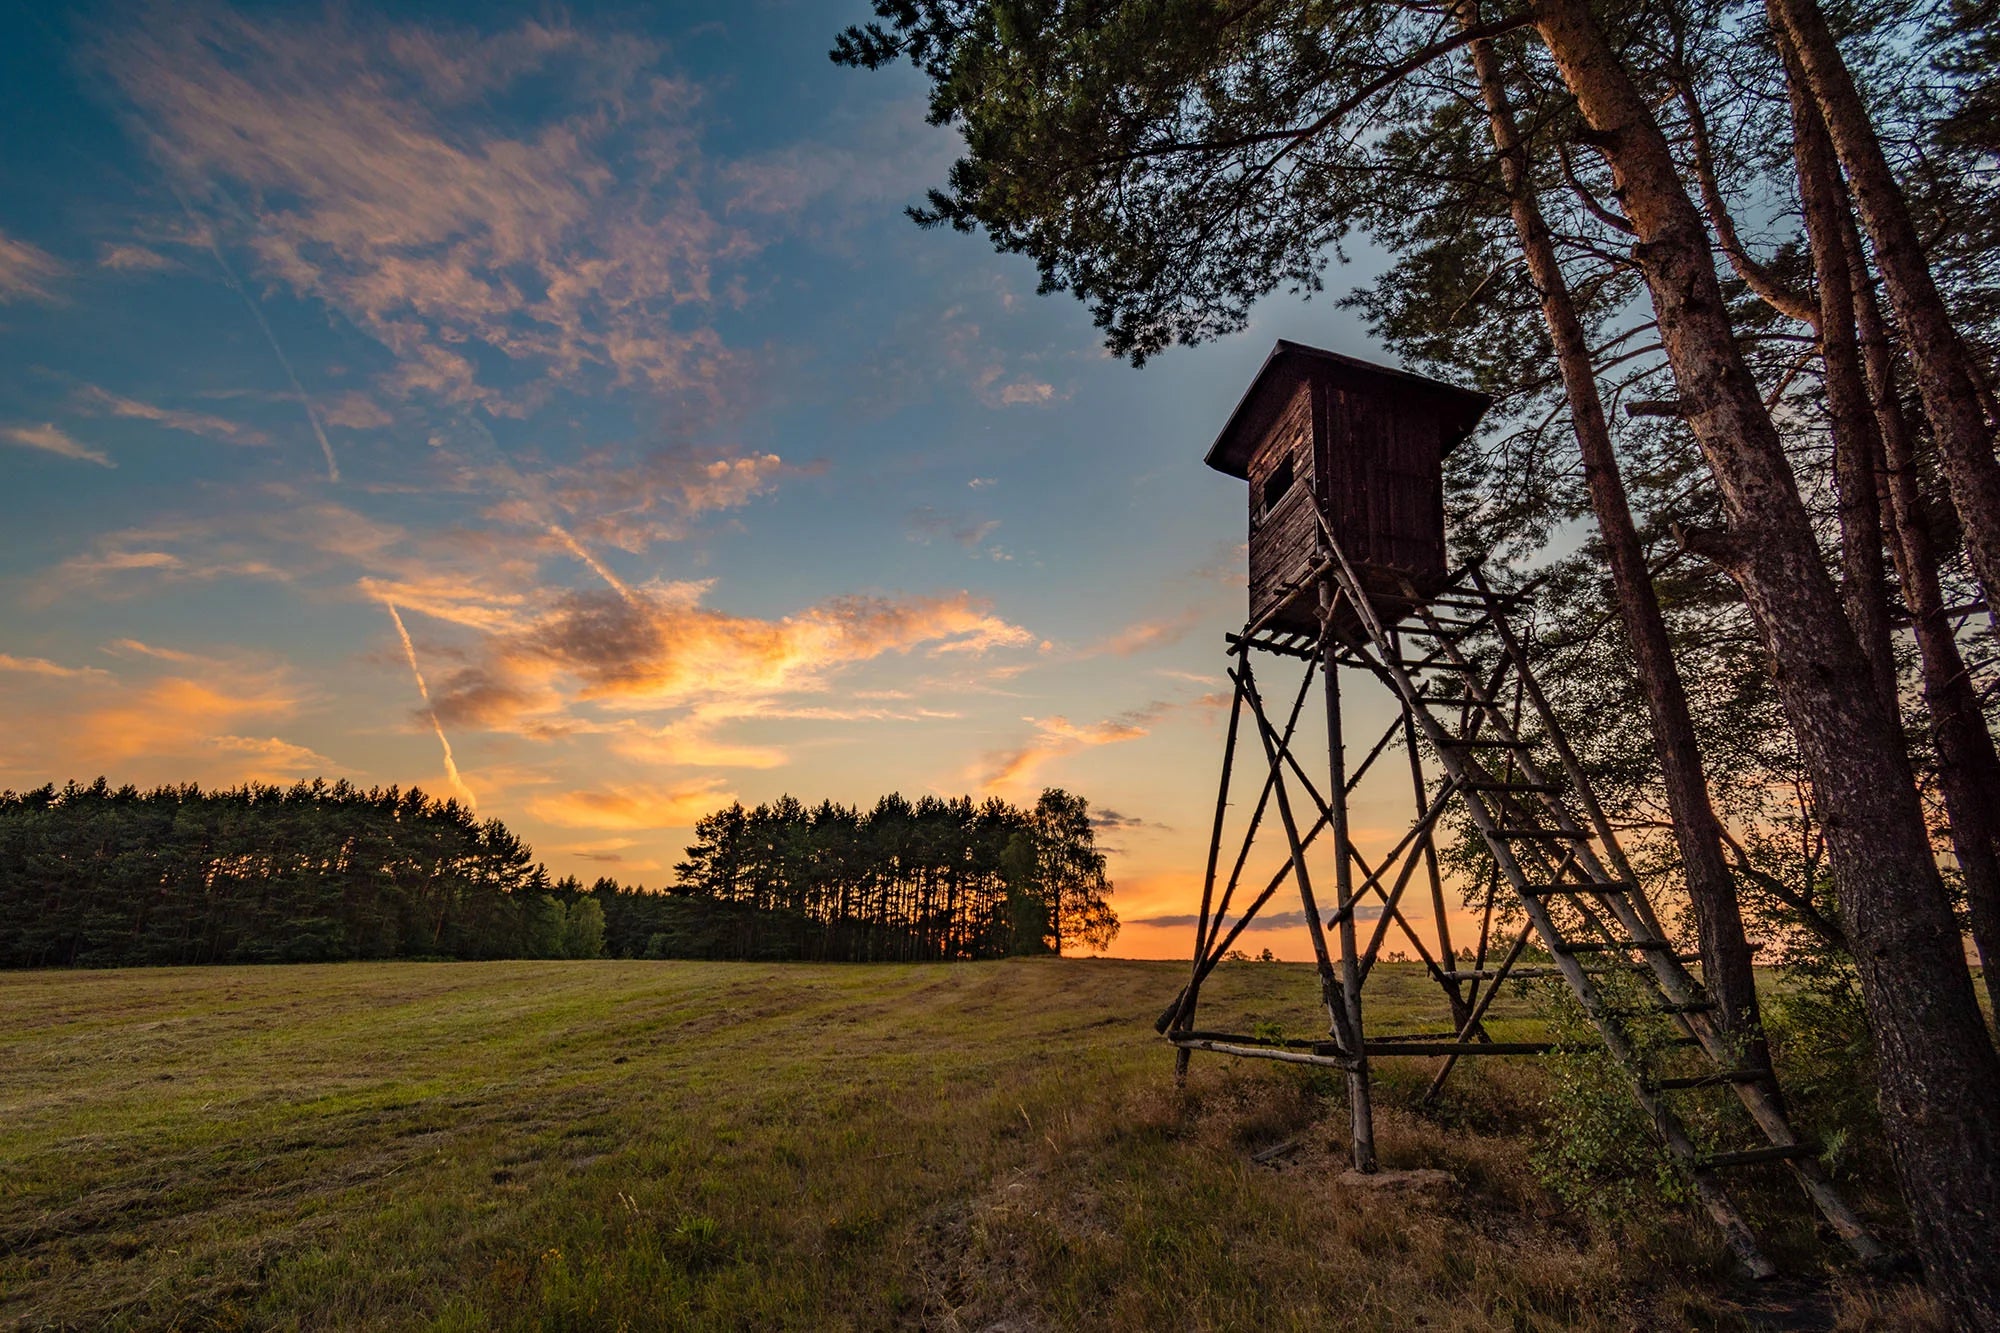 Hunting tower at sunrise